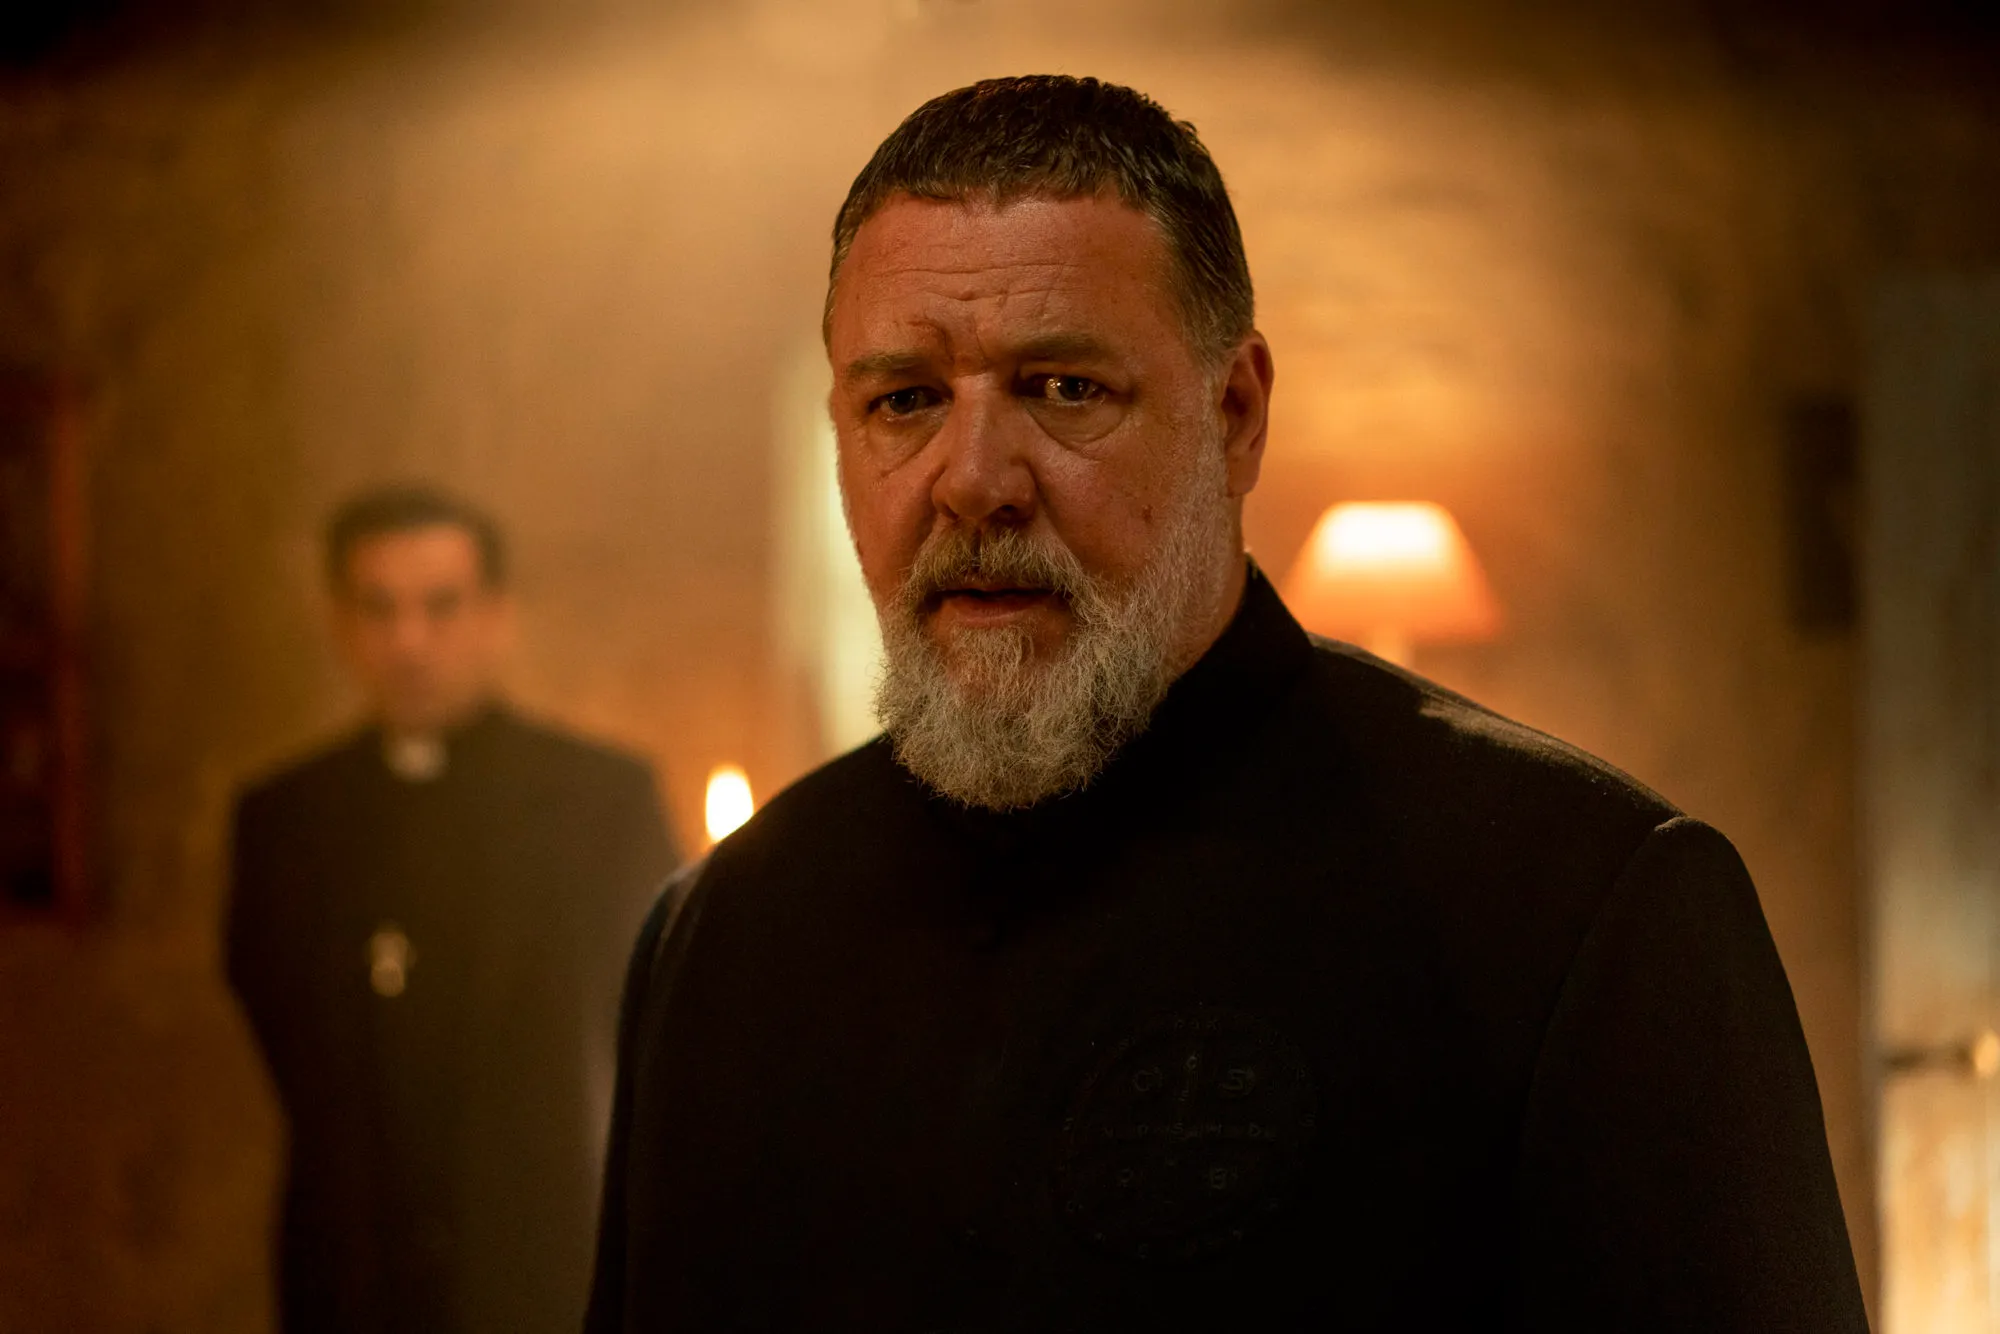 The Pope's Exorcist, Russell Crowe